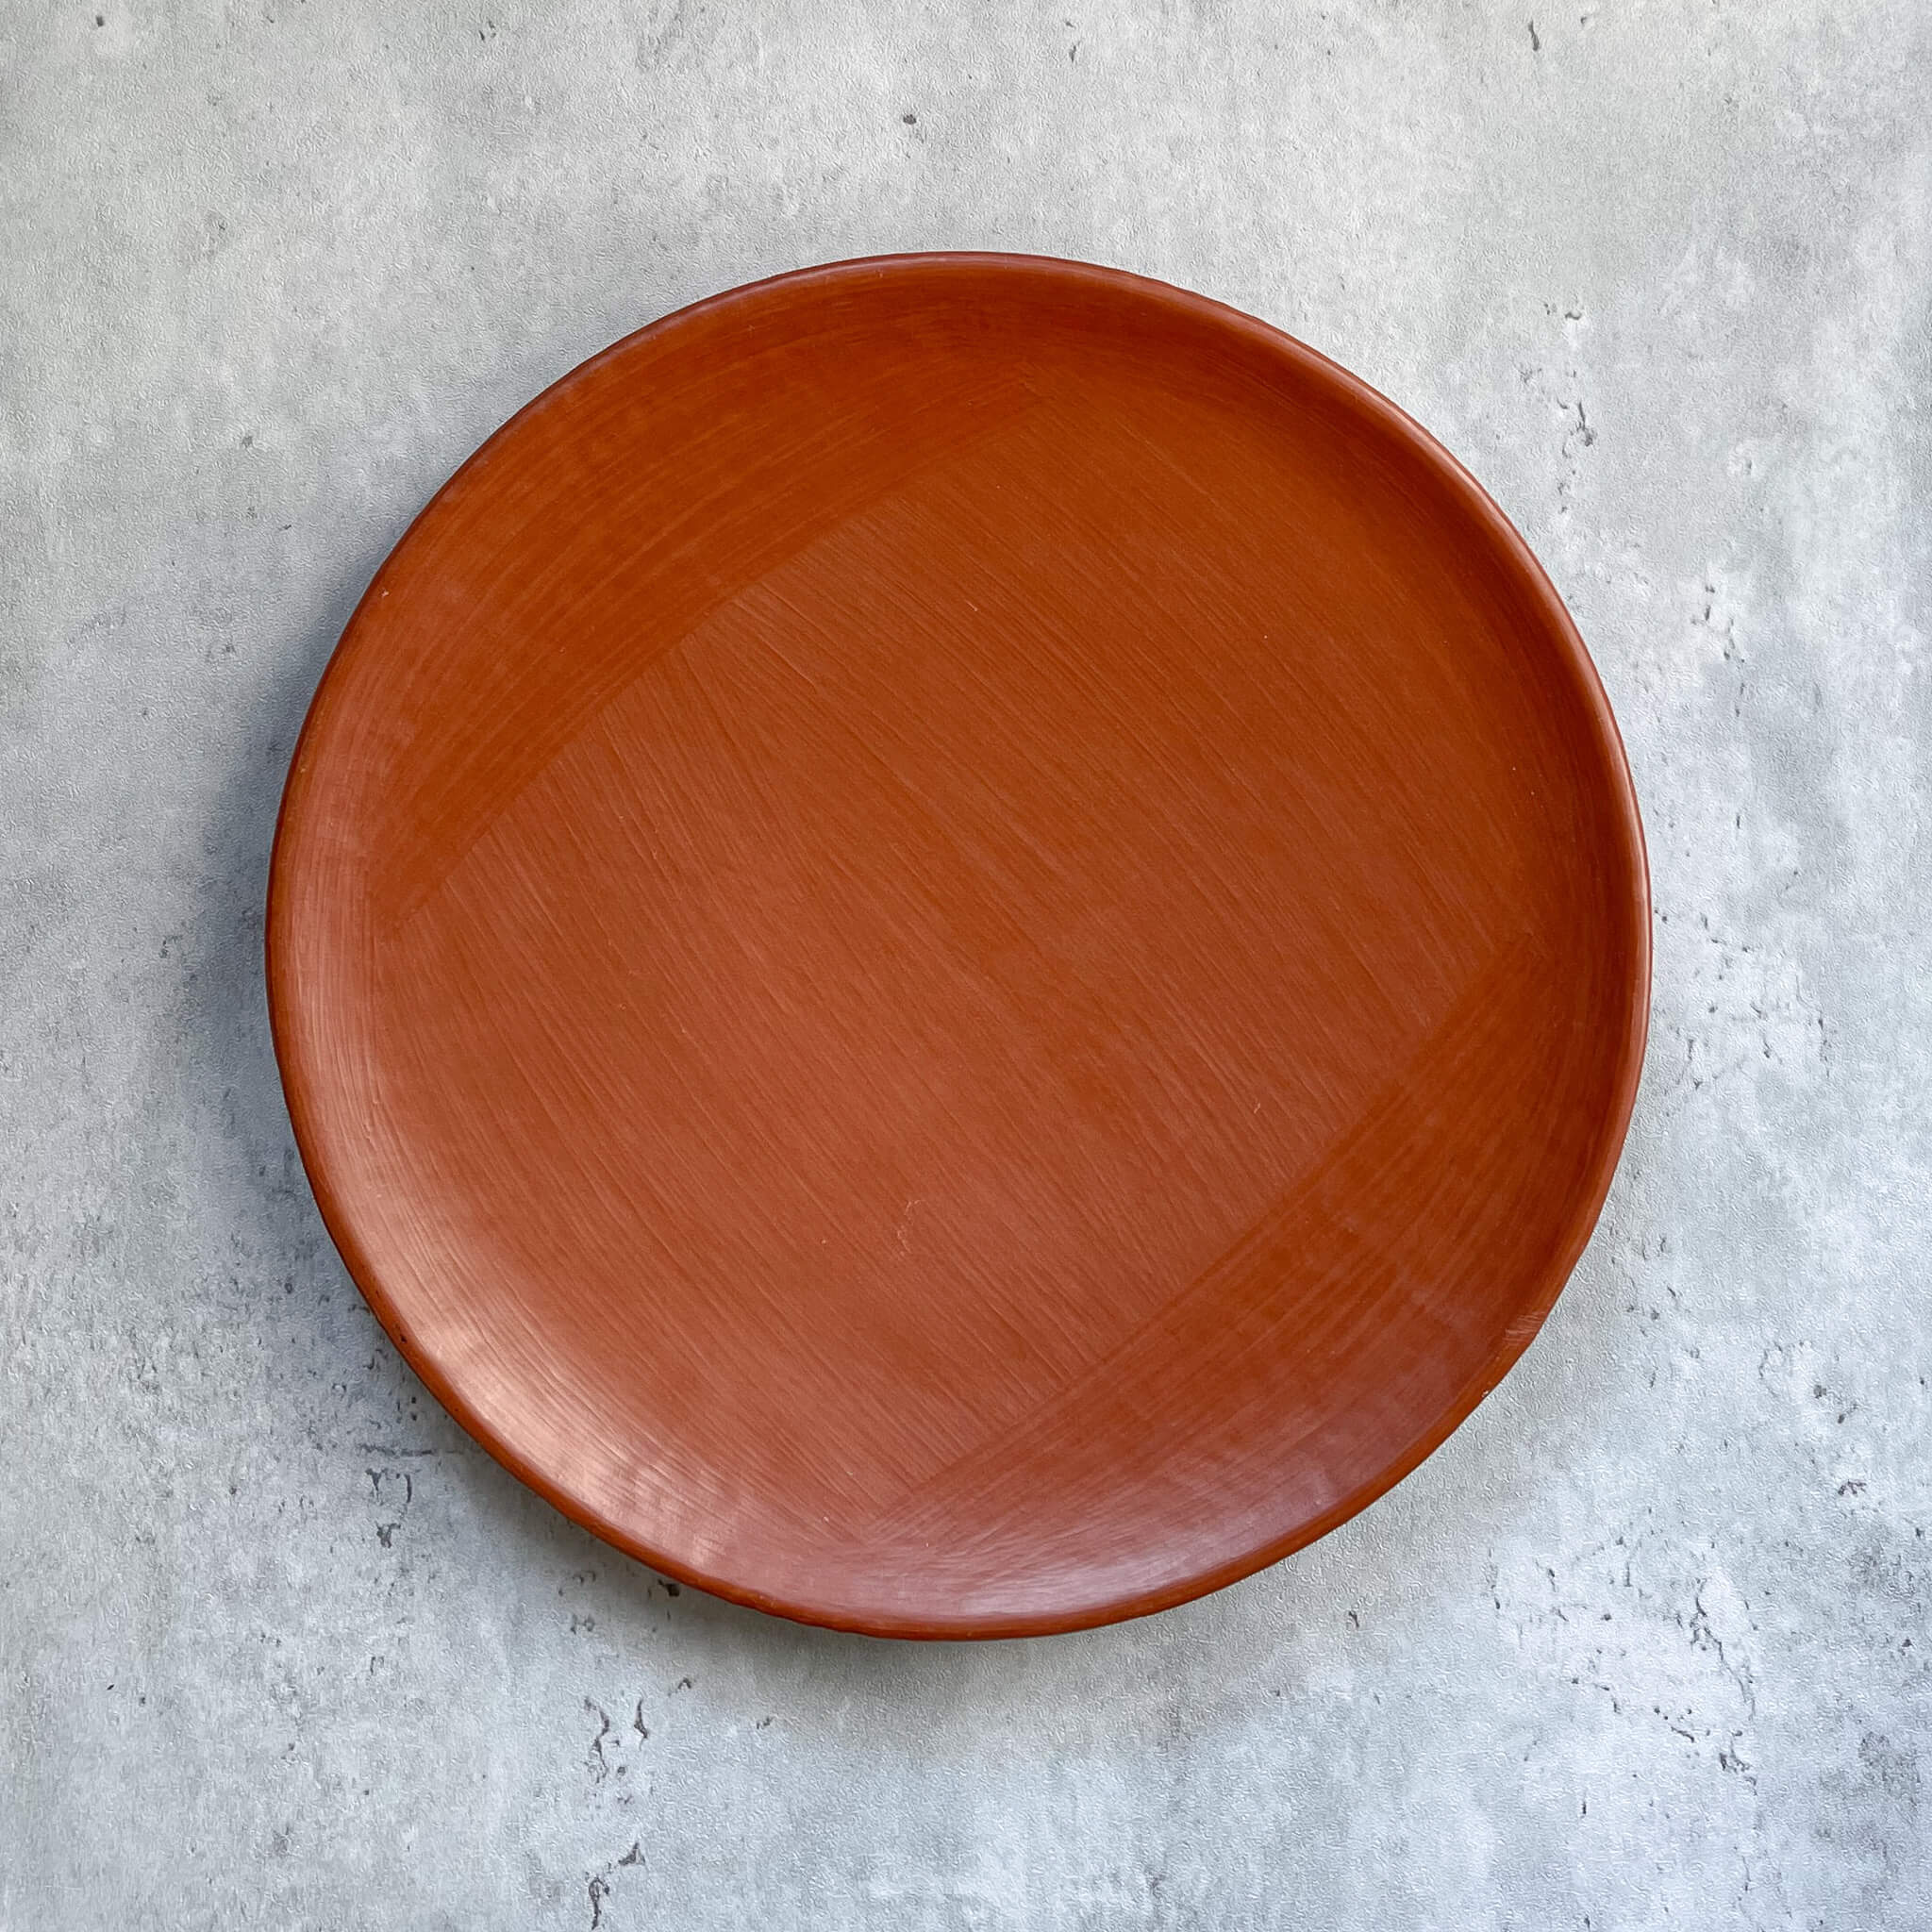 A large Oaxaca red clay dinner plate.